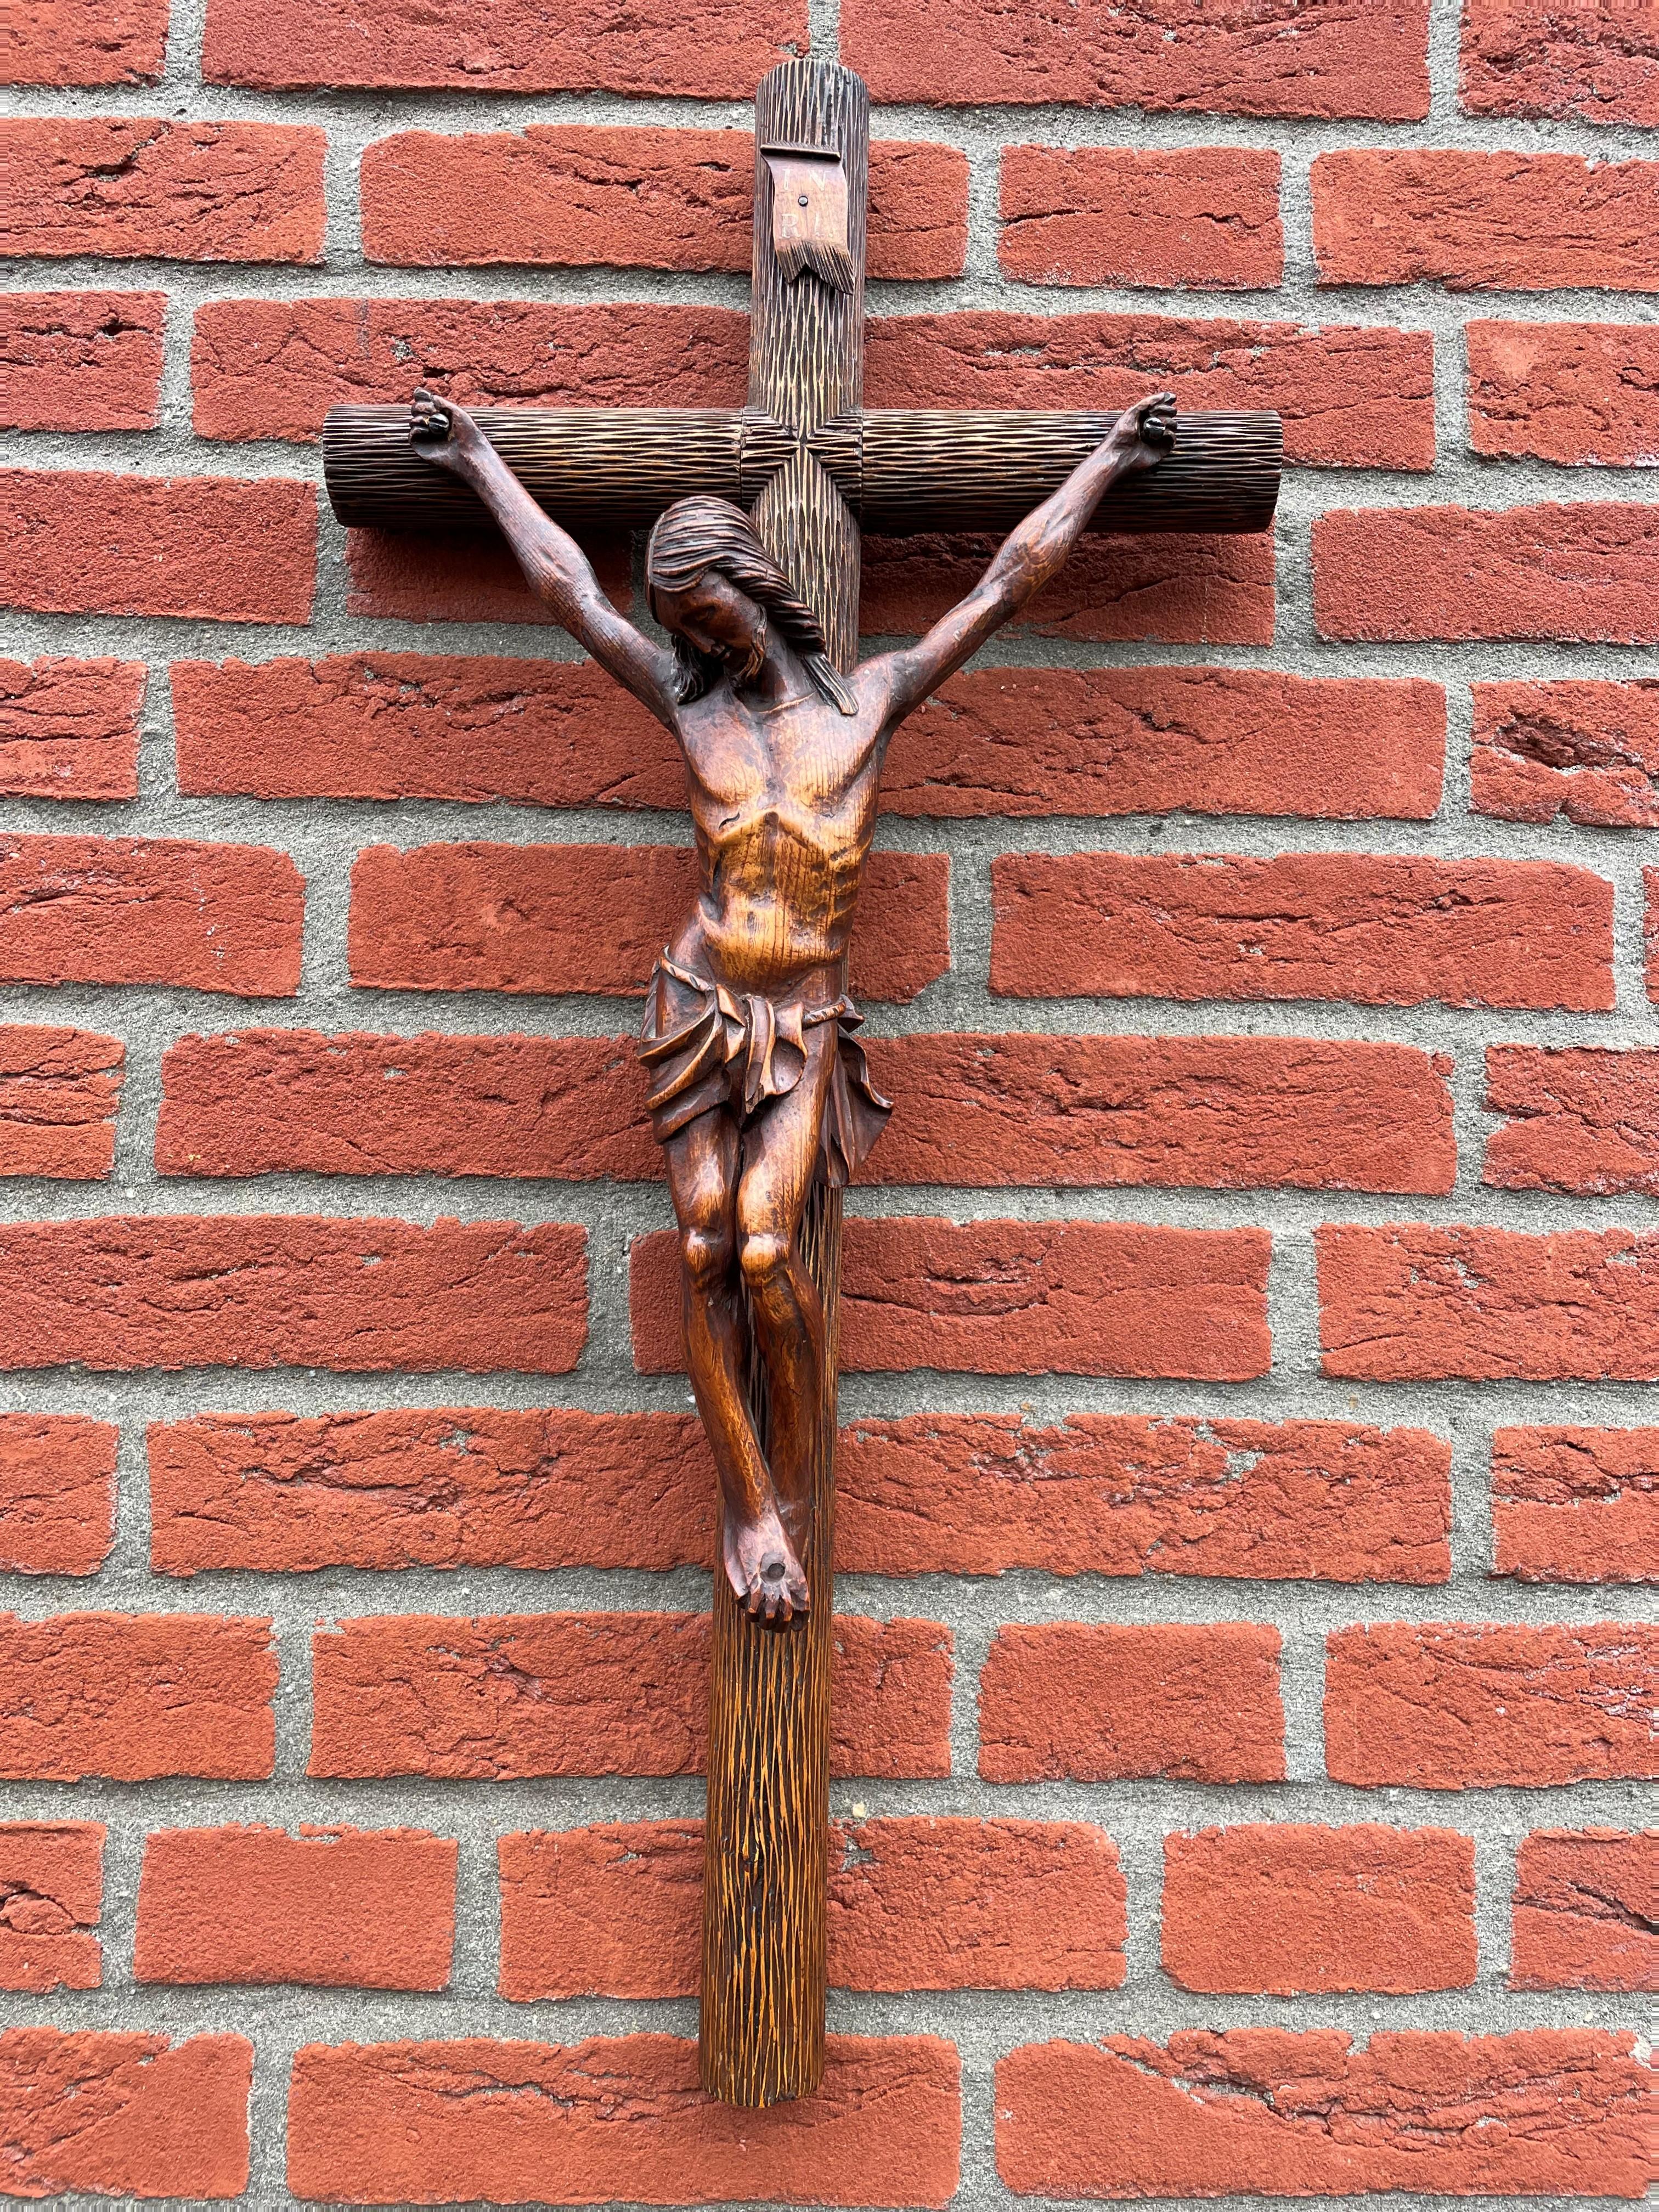 Unique and perfectly balanced crucifix with a marvelous cross and a detailed corpus of Jesus.

This unique design crucifix comes with an incredibly detailed and top quality carved, circular, tree trunk-like cross. We have never seen such a cross